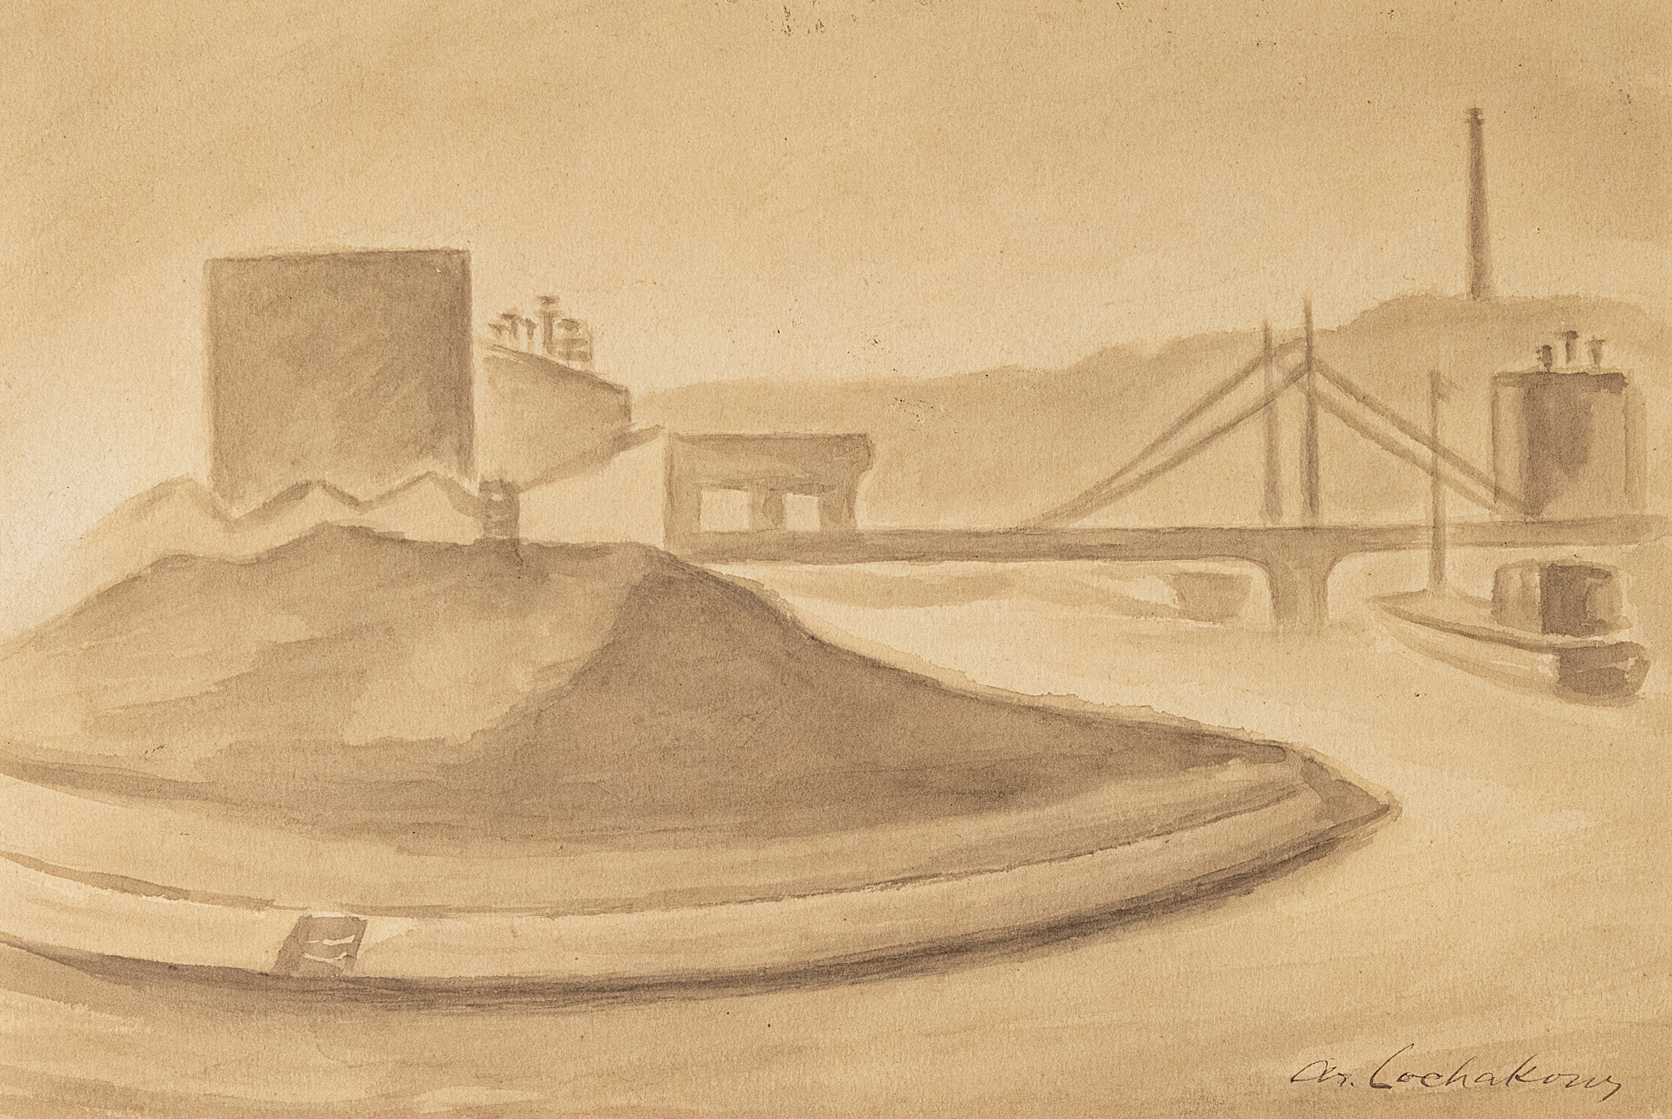 Sepia-toned sketch of industrial waterfront with buildings, a bridge, and boats.